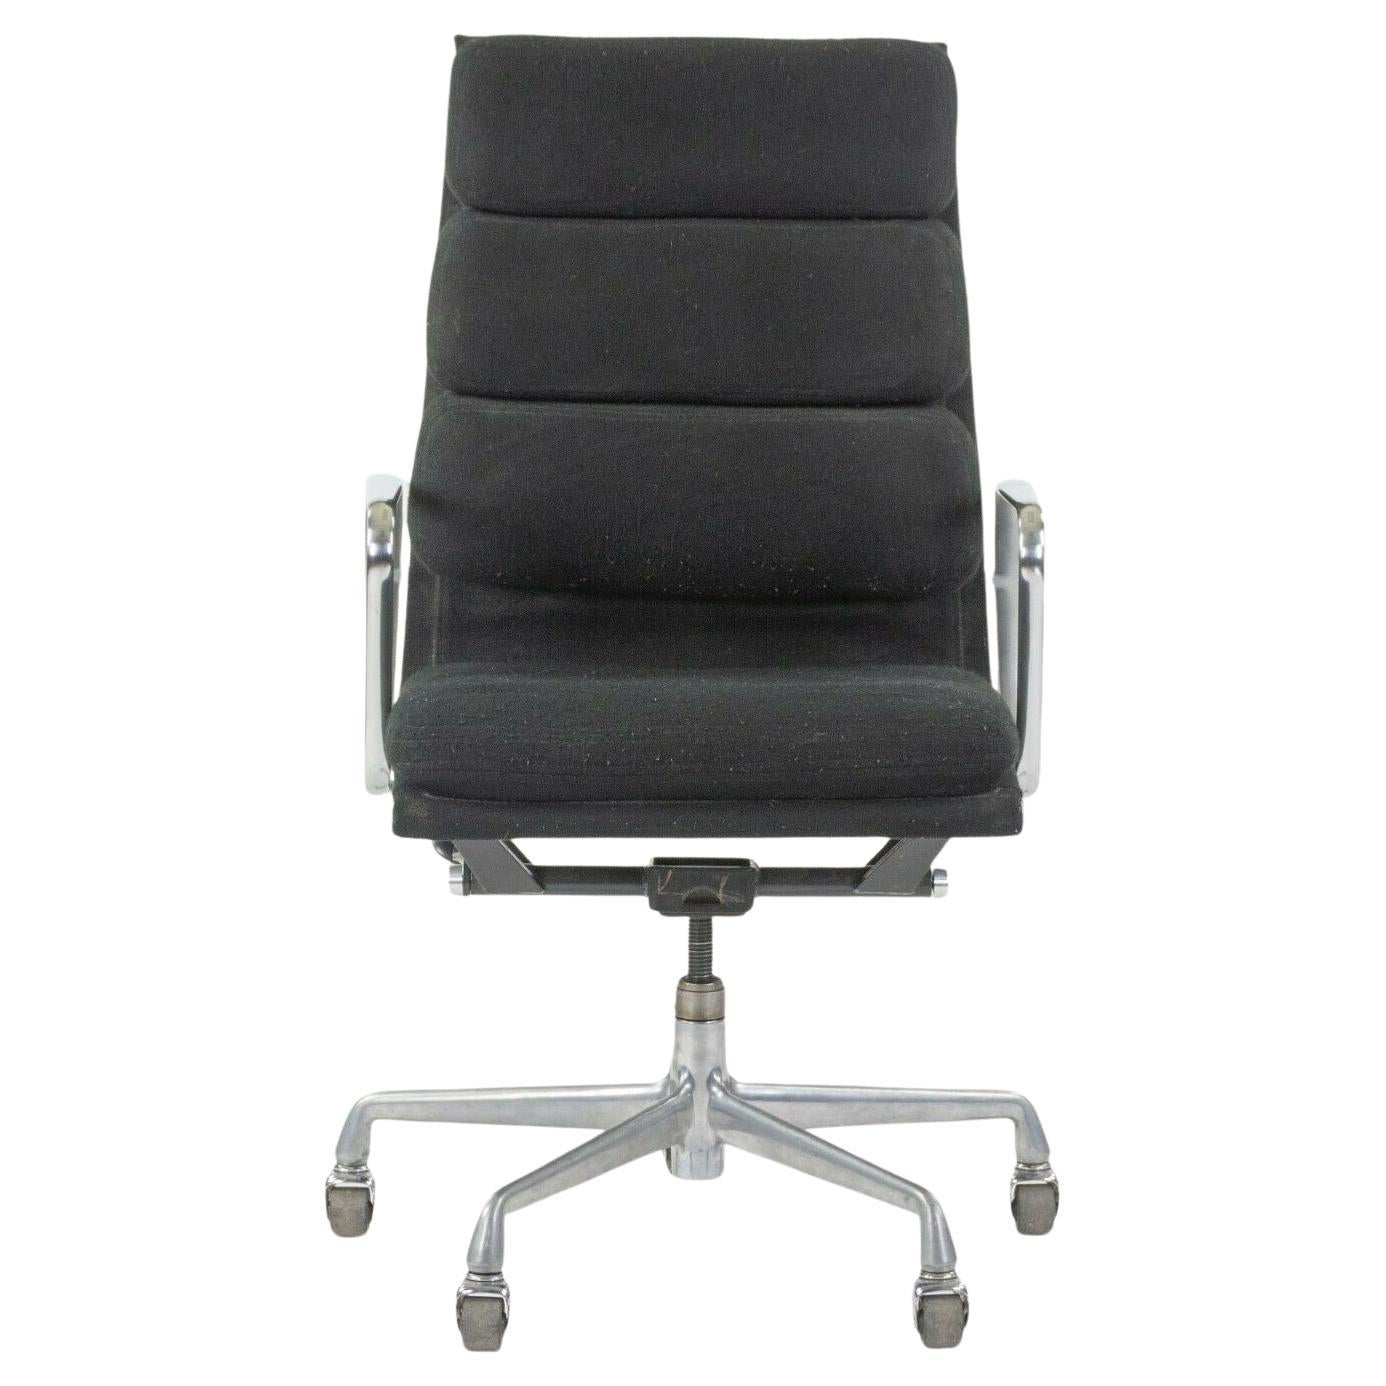 1985 Fabric Herman Miller Eames Aluminum Group Executive High Back Desk Chair For Sale